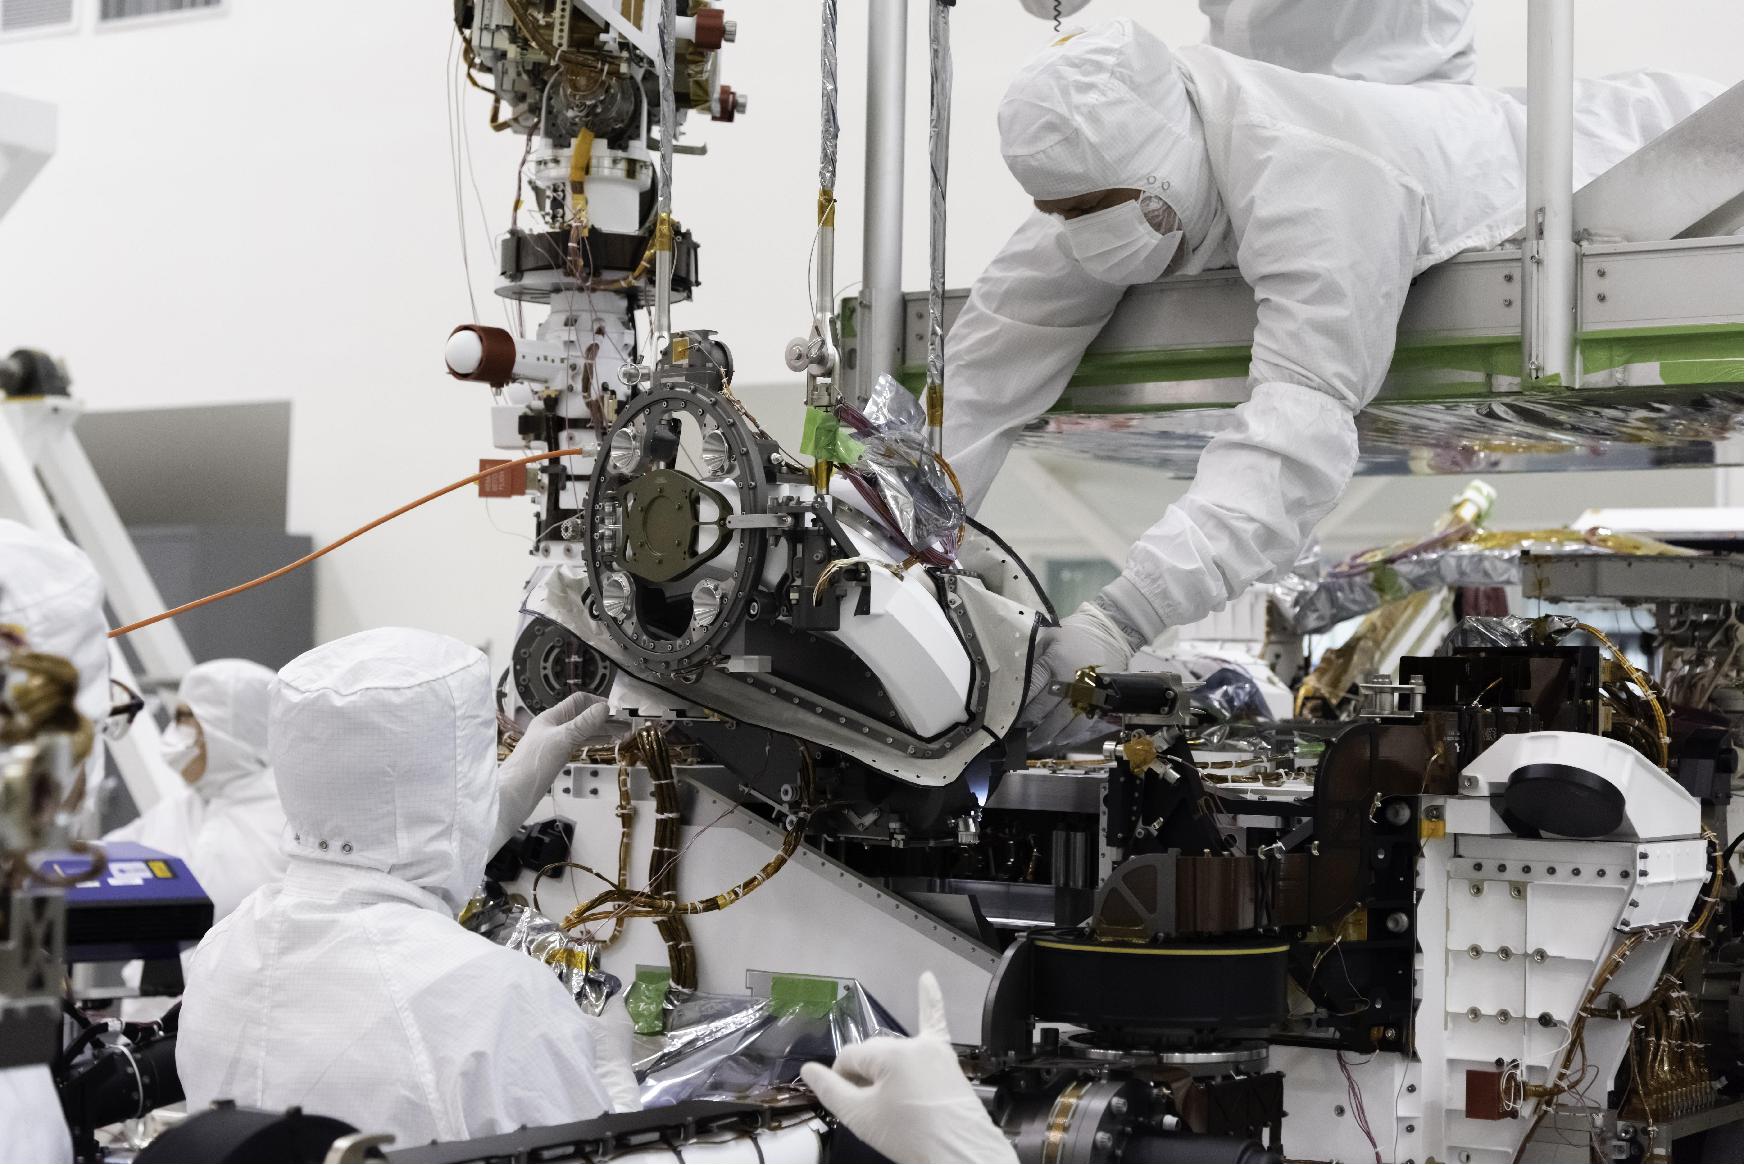 Figure 16: The bit carousel, which lies at the heart of Sample Caching System of NASA's Mars 2020 mission, is attached to the front end of the rover in the Spacecraft Assembly Facility's High Bay 1 at the Jet Propulsion Laboratory in Pasadena, California. The carousel contains all of the tools the coring drill uses to sample the Martian surface and is the gateway for the samples to move into the rover for assessment and processing (image credit: NASA/JPL-Caltech)